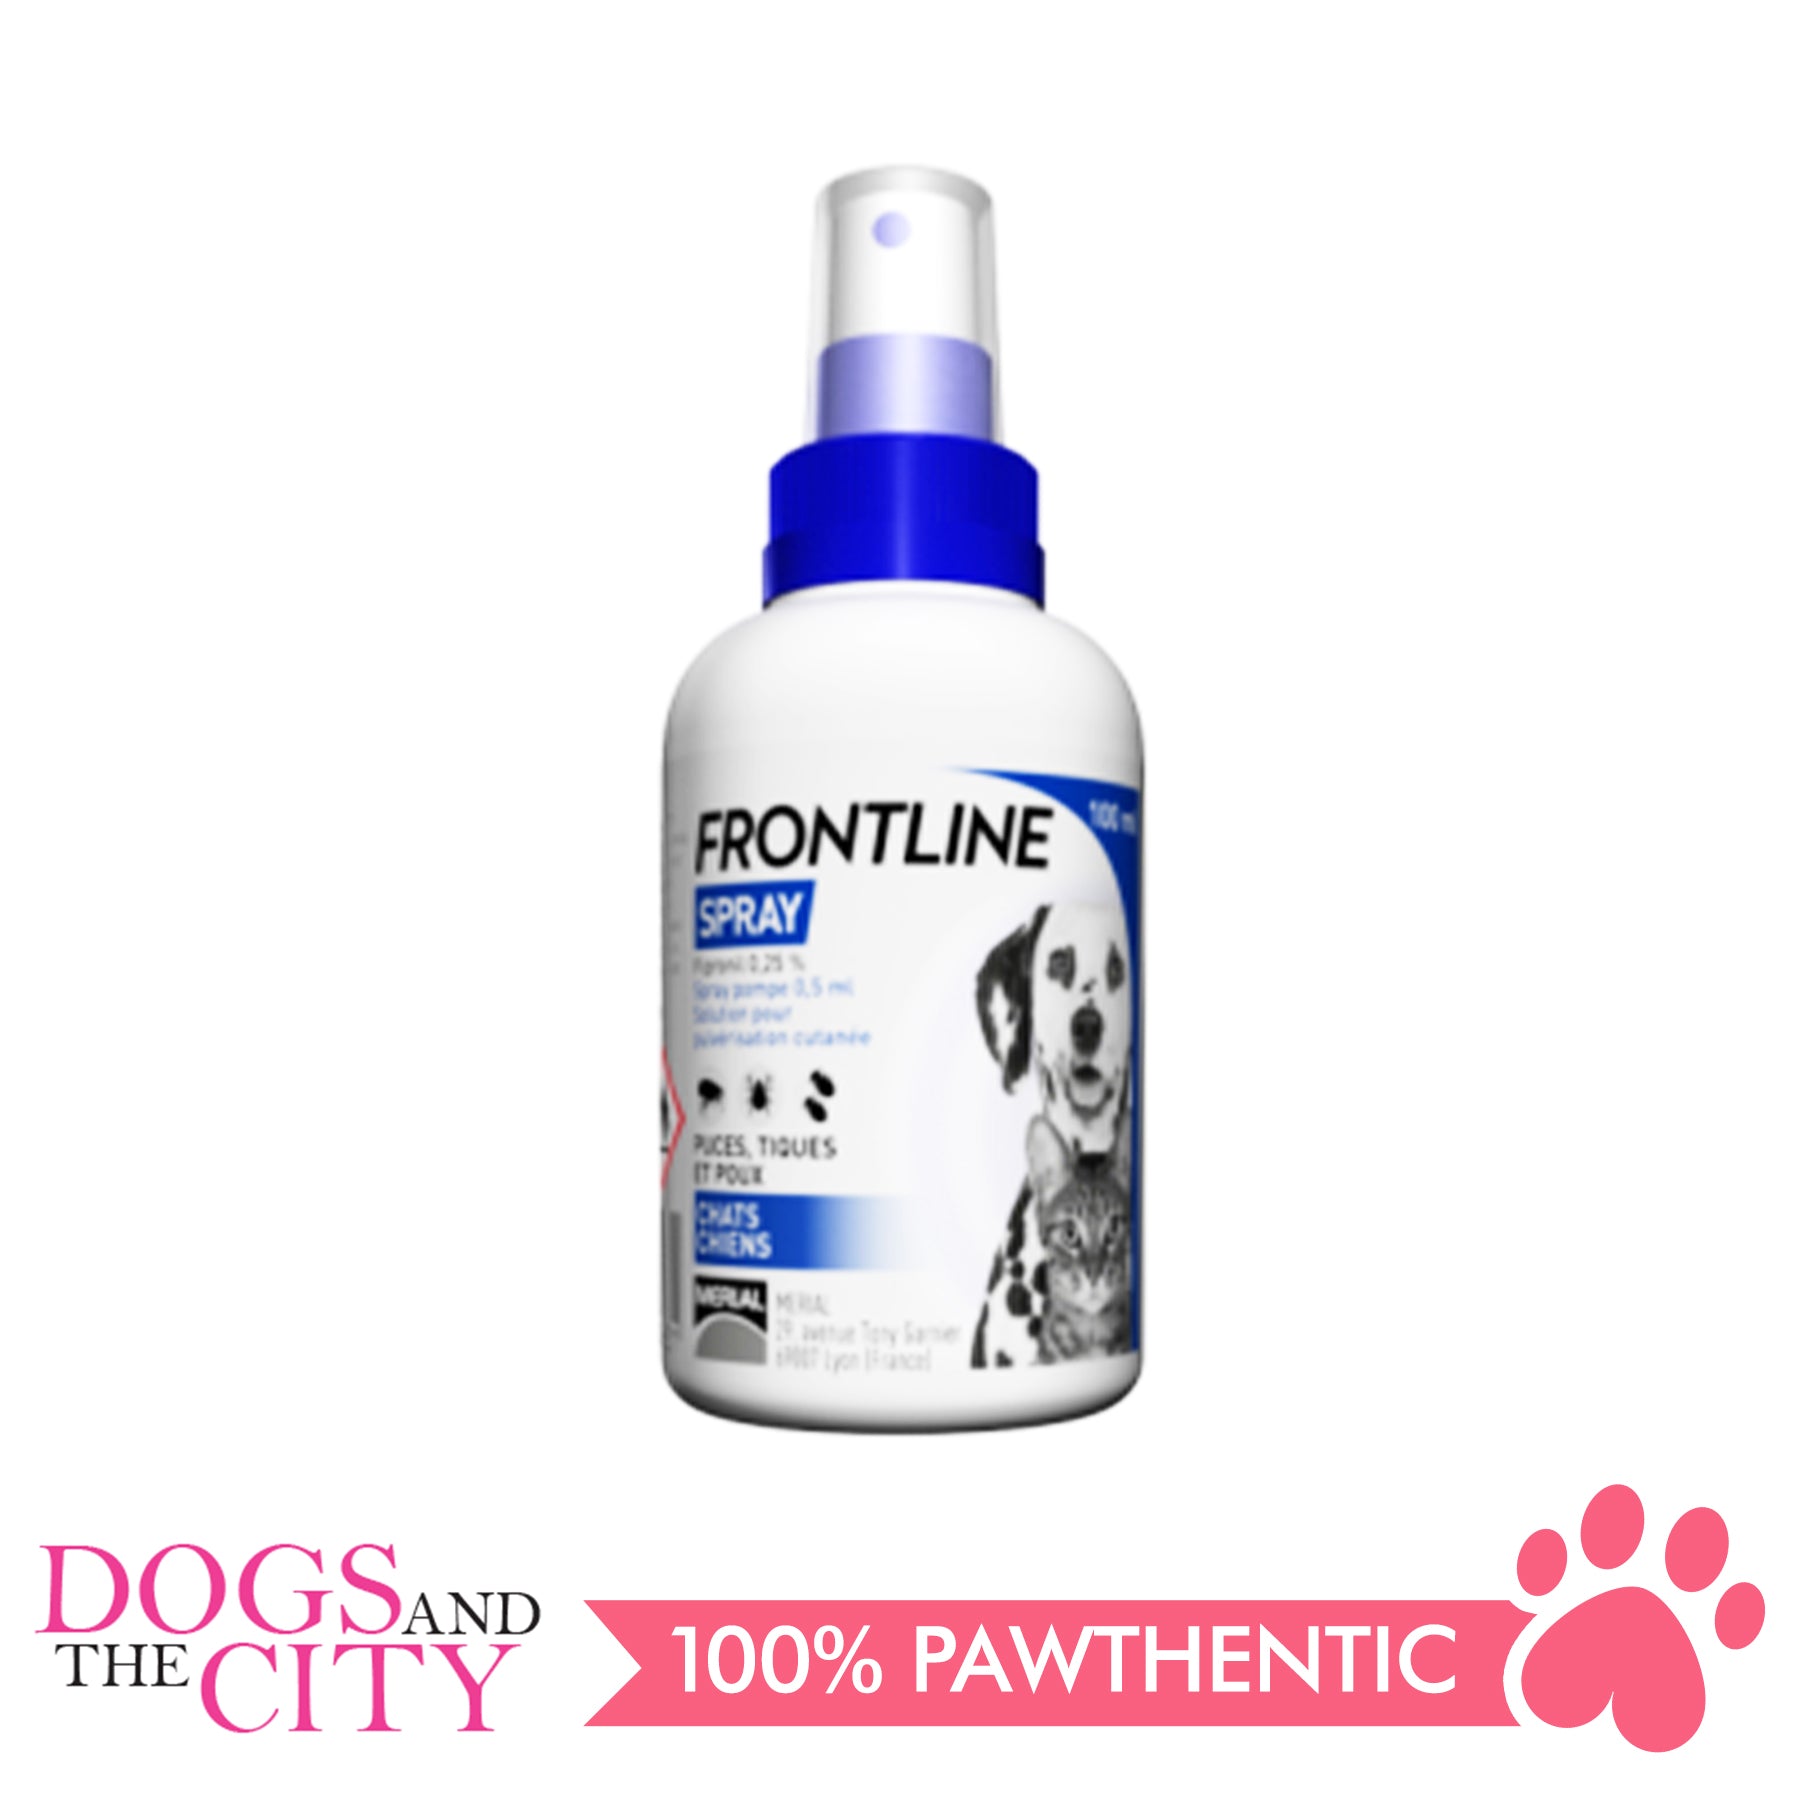 Frontline Spray for Dogs, Flea and Tick Control - Jeffers